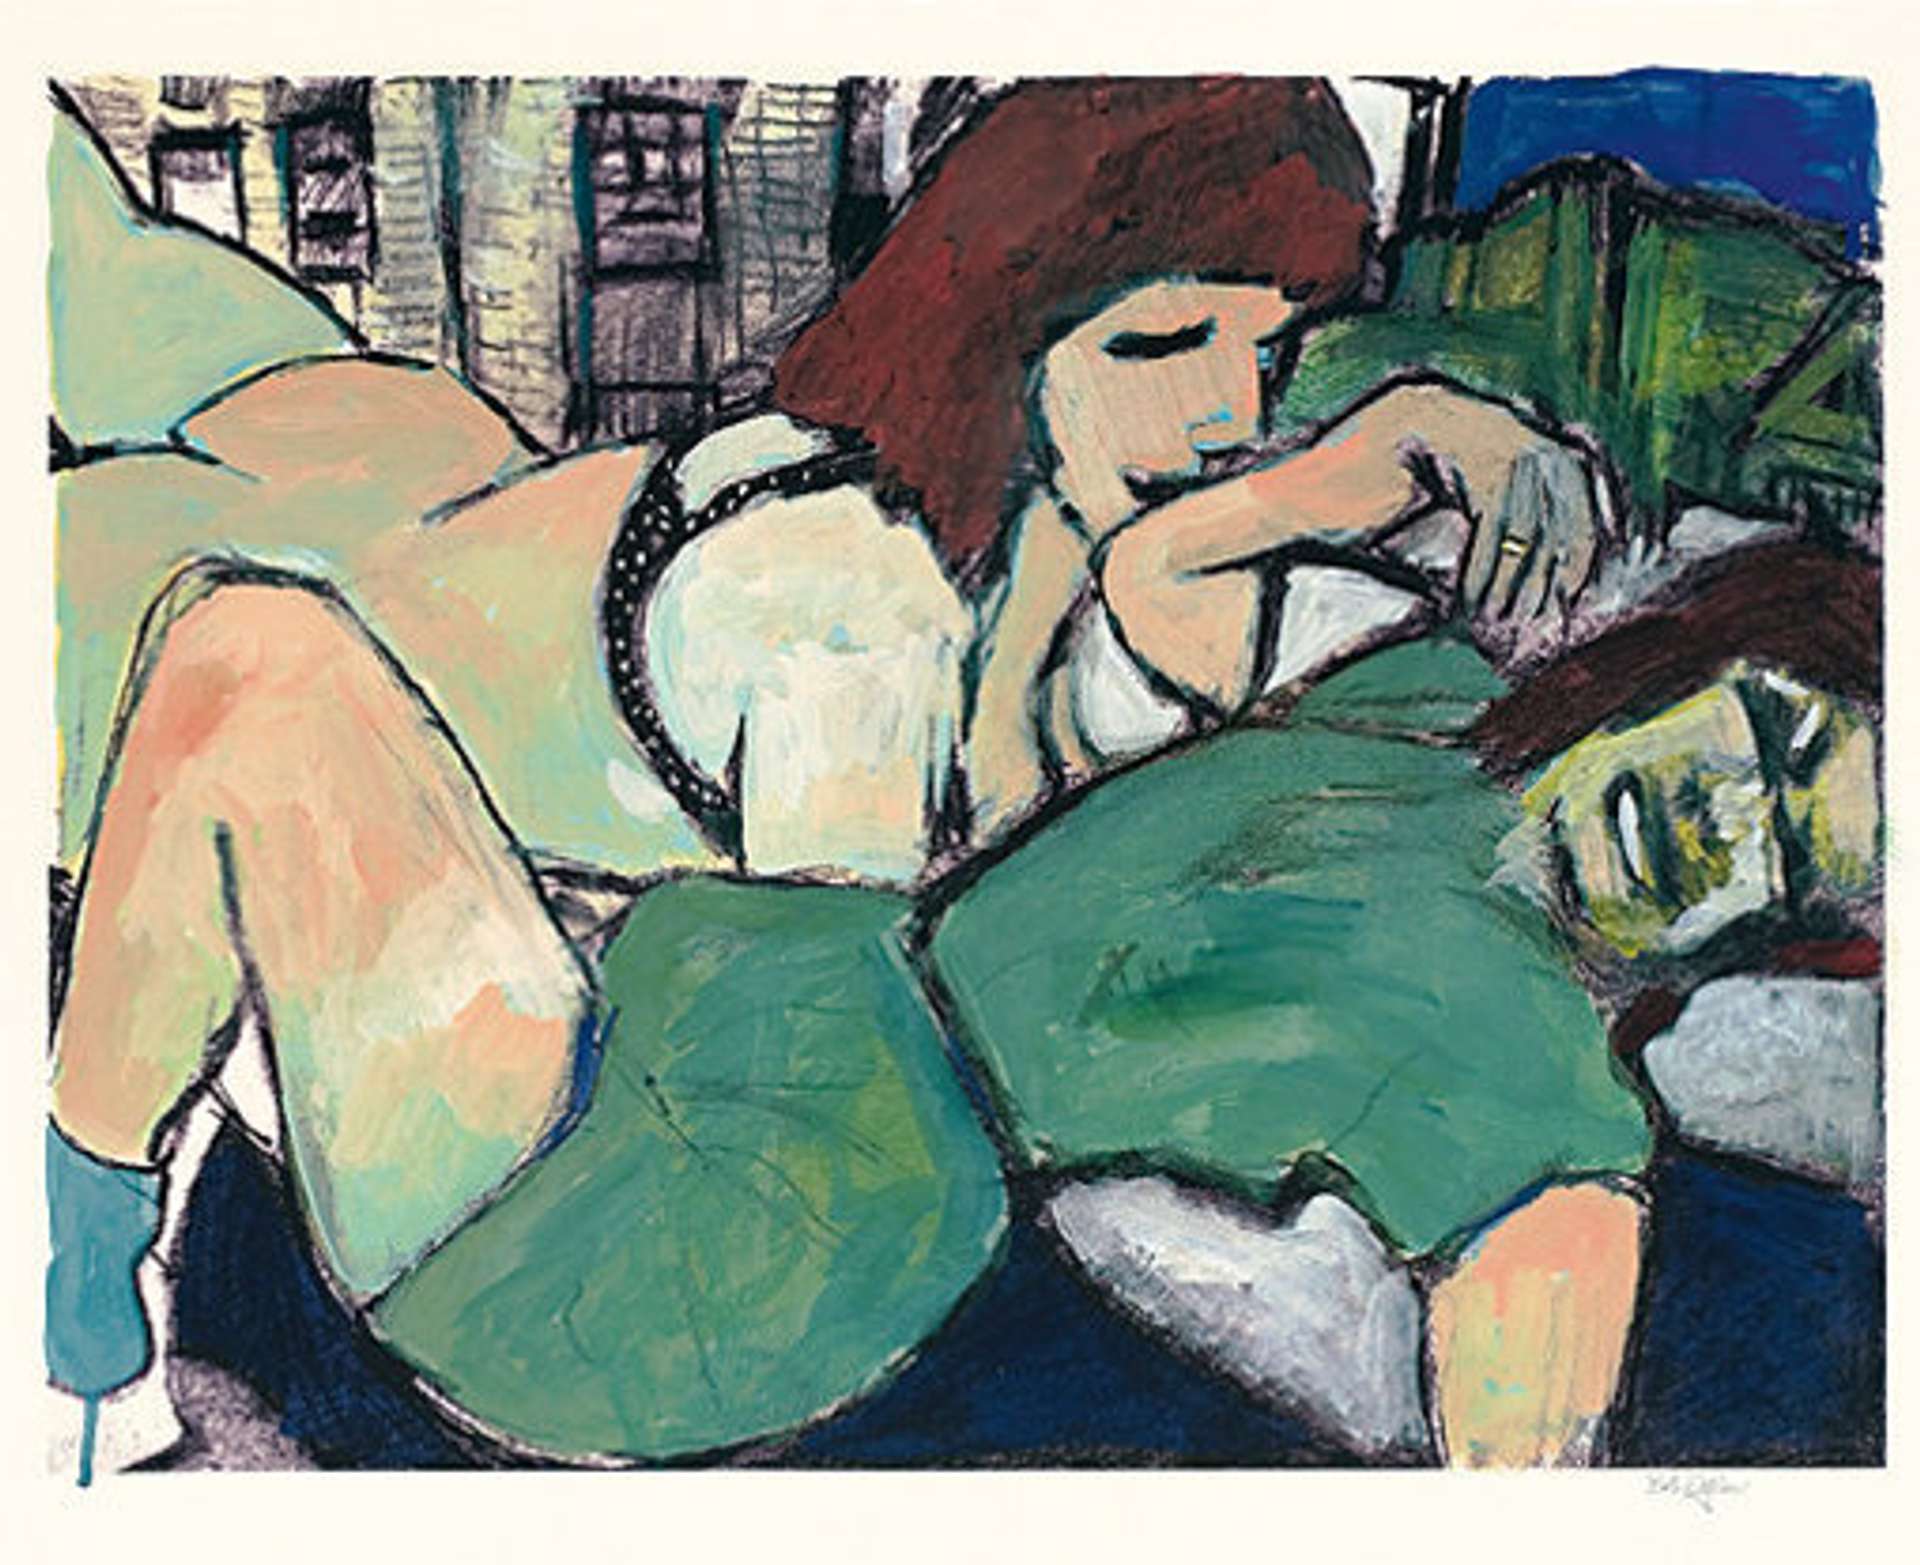 Alt-text: A painting by artist Bob Dylan, depicting two women laughing together in a bed.